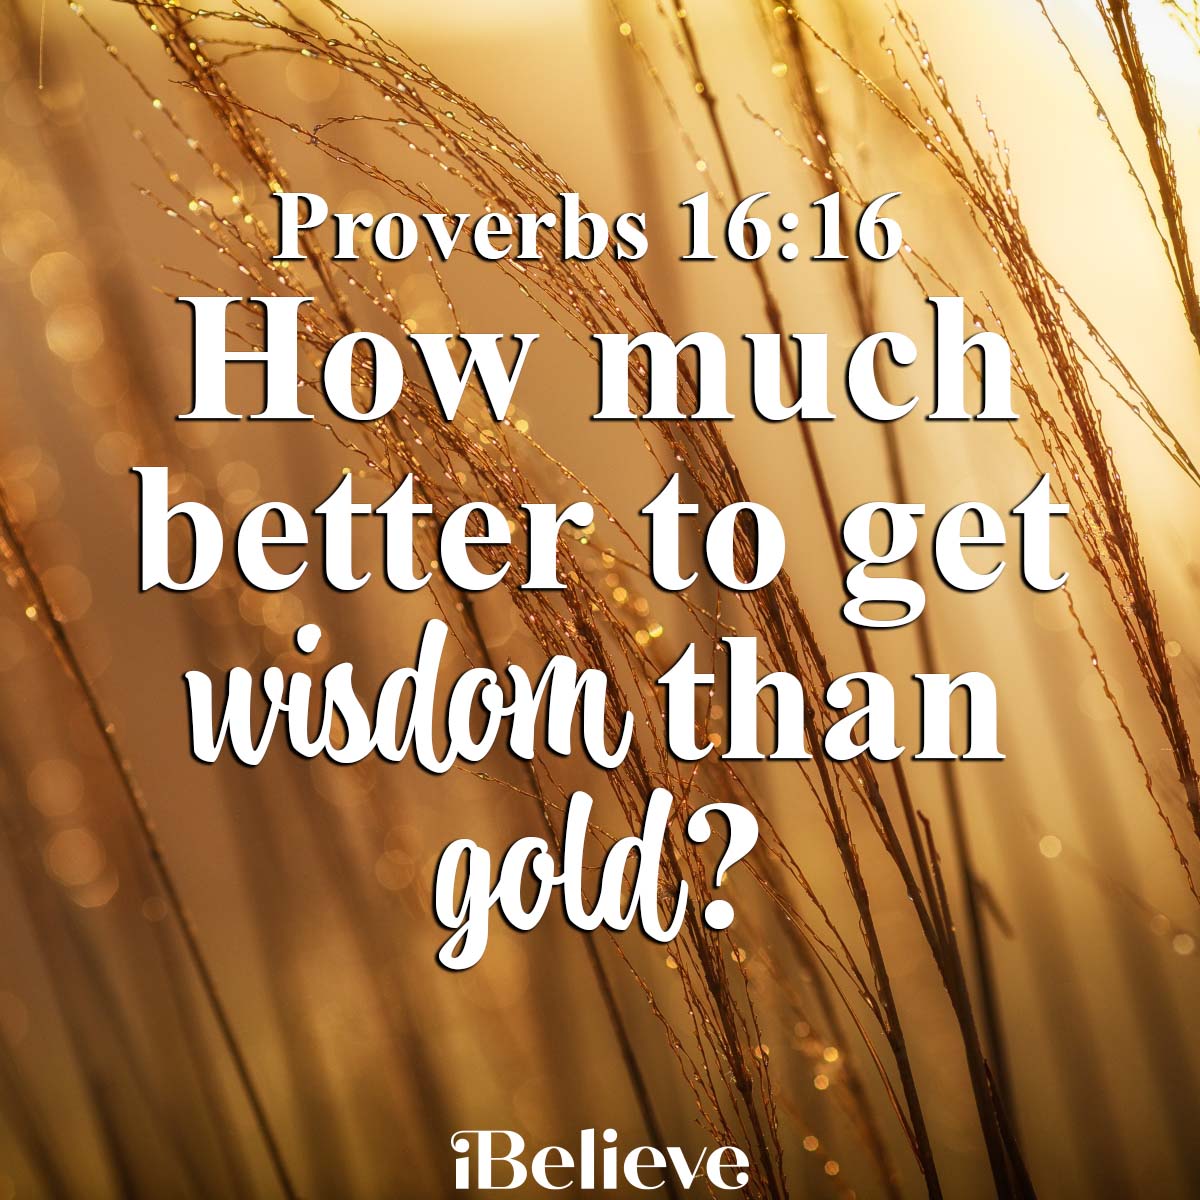 Proverbs 16:16, inspirational image